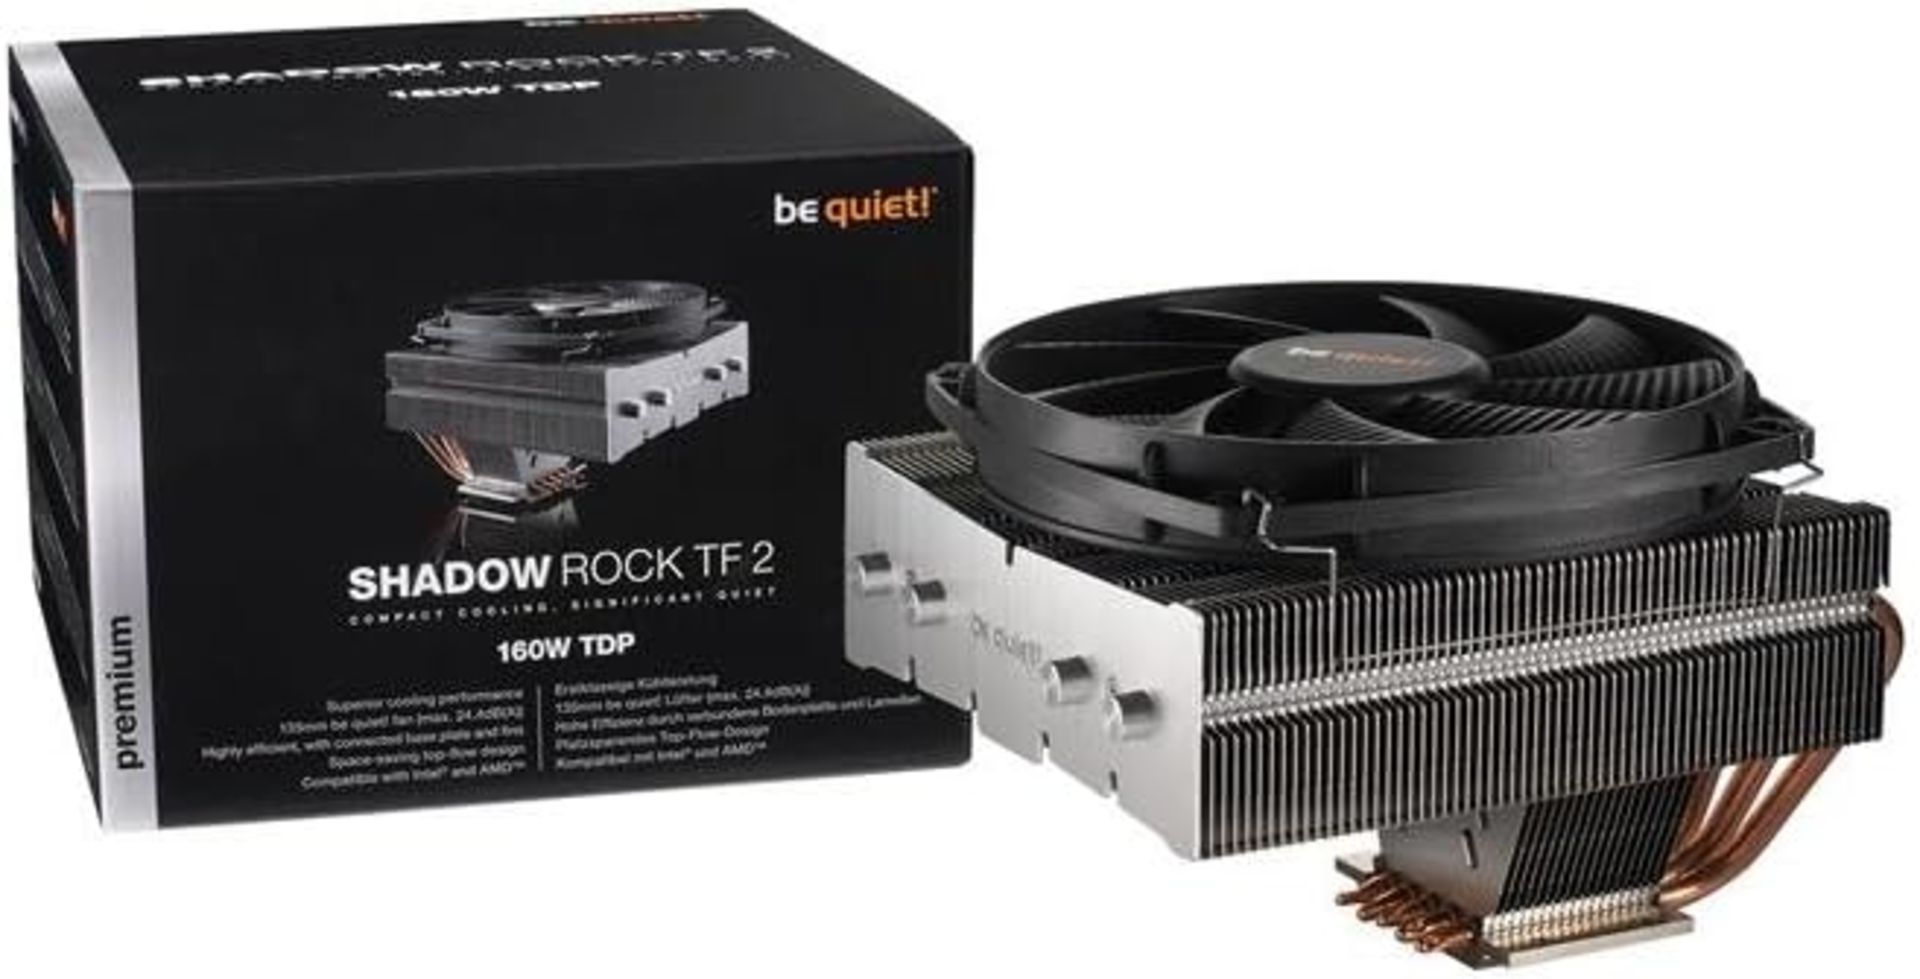 NEW & BOXED BE QUIET! Shadow Rock TF 2 CPU Cooler. RRP £59.99. Shadow Rock TF 2 is the perfect - Image 7 of 7